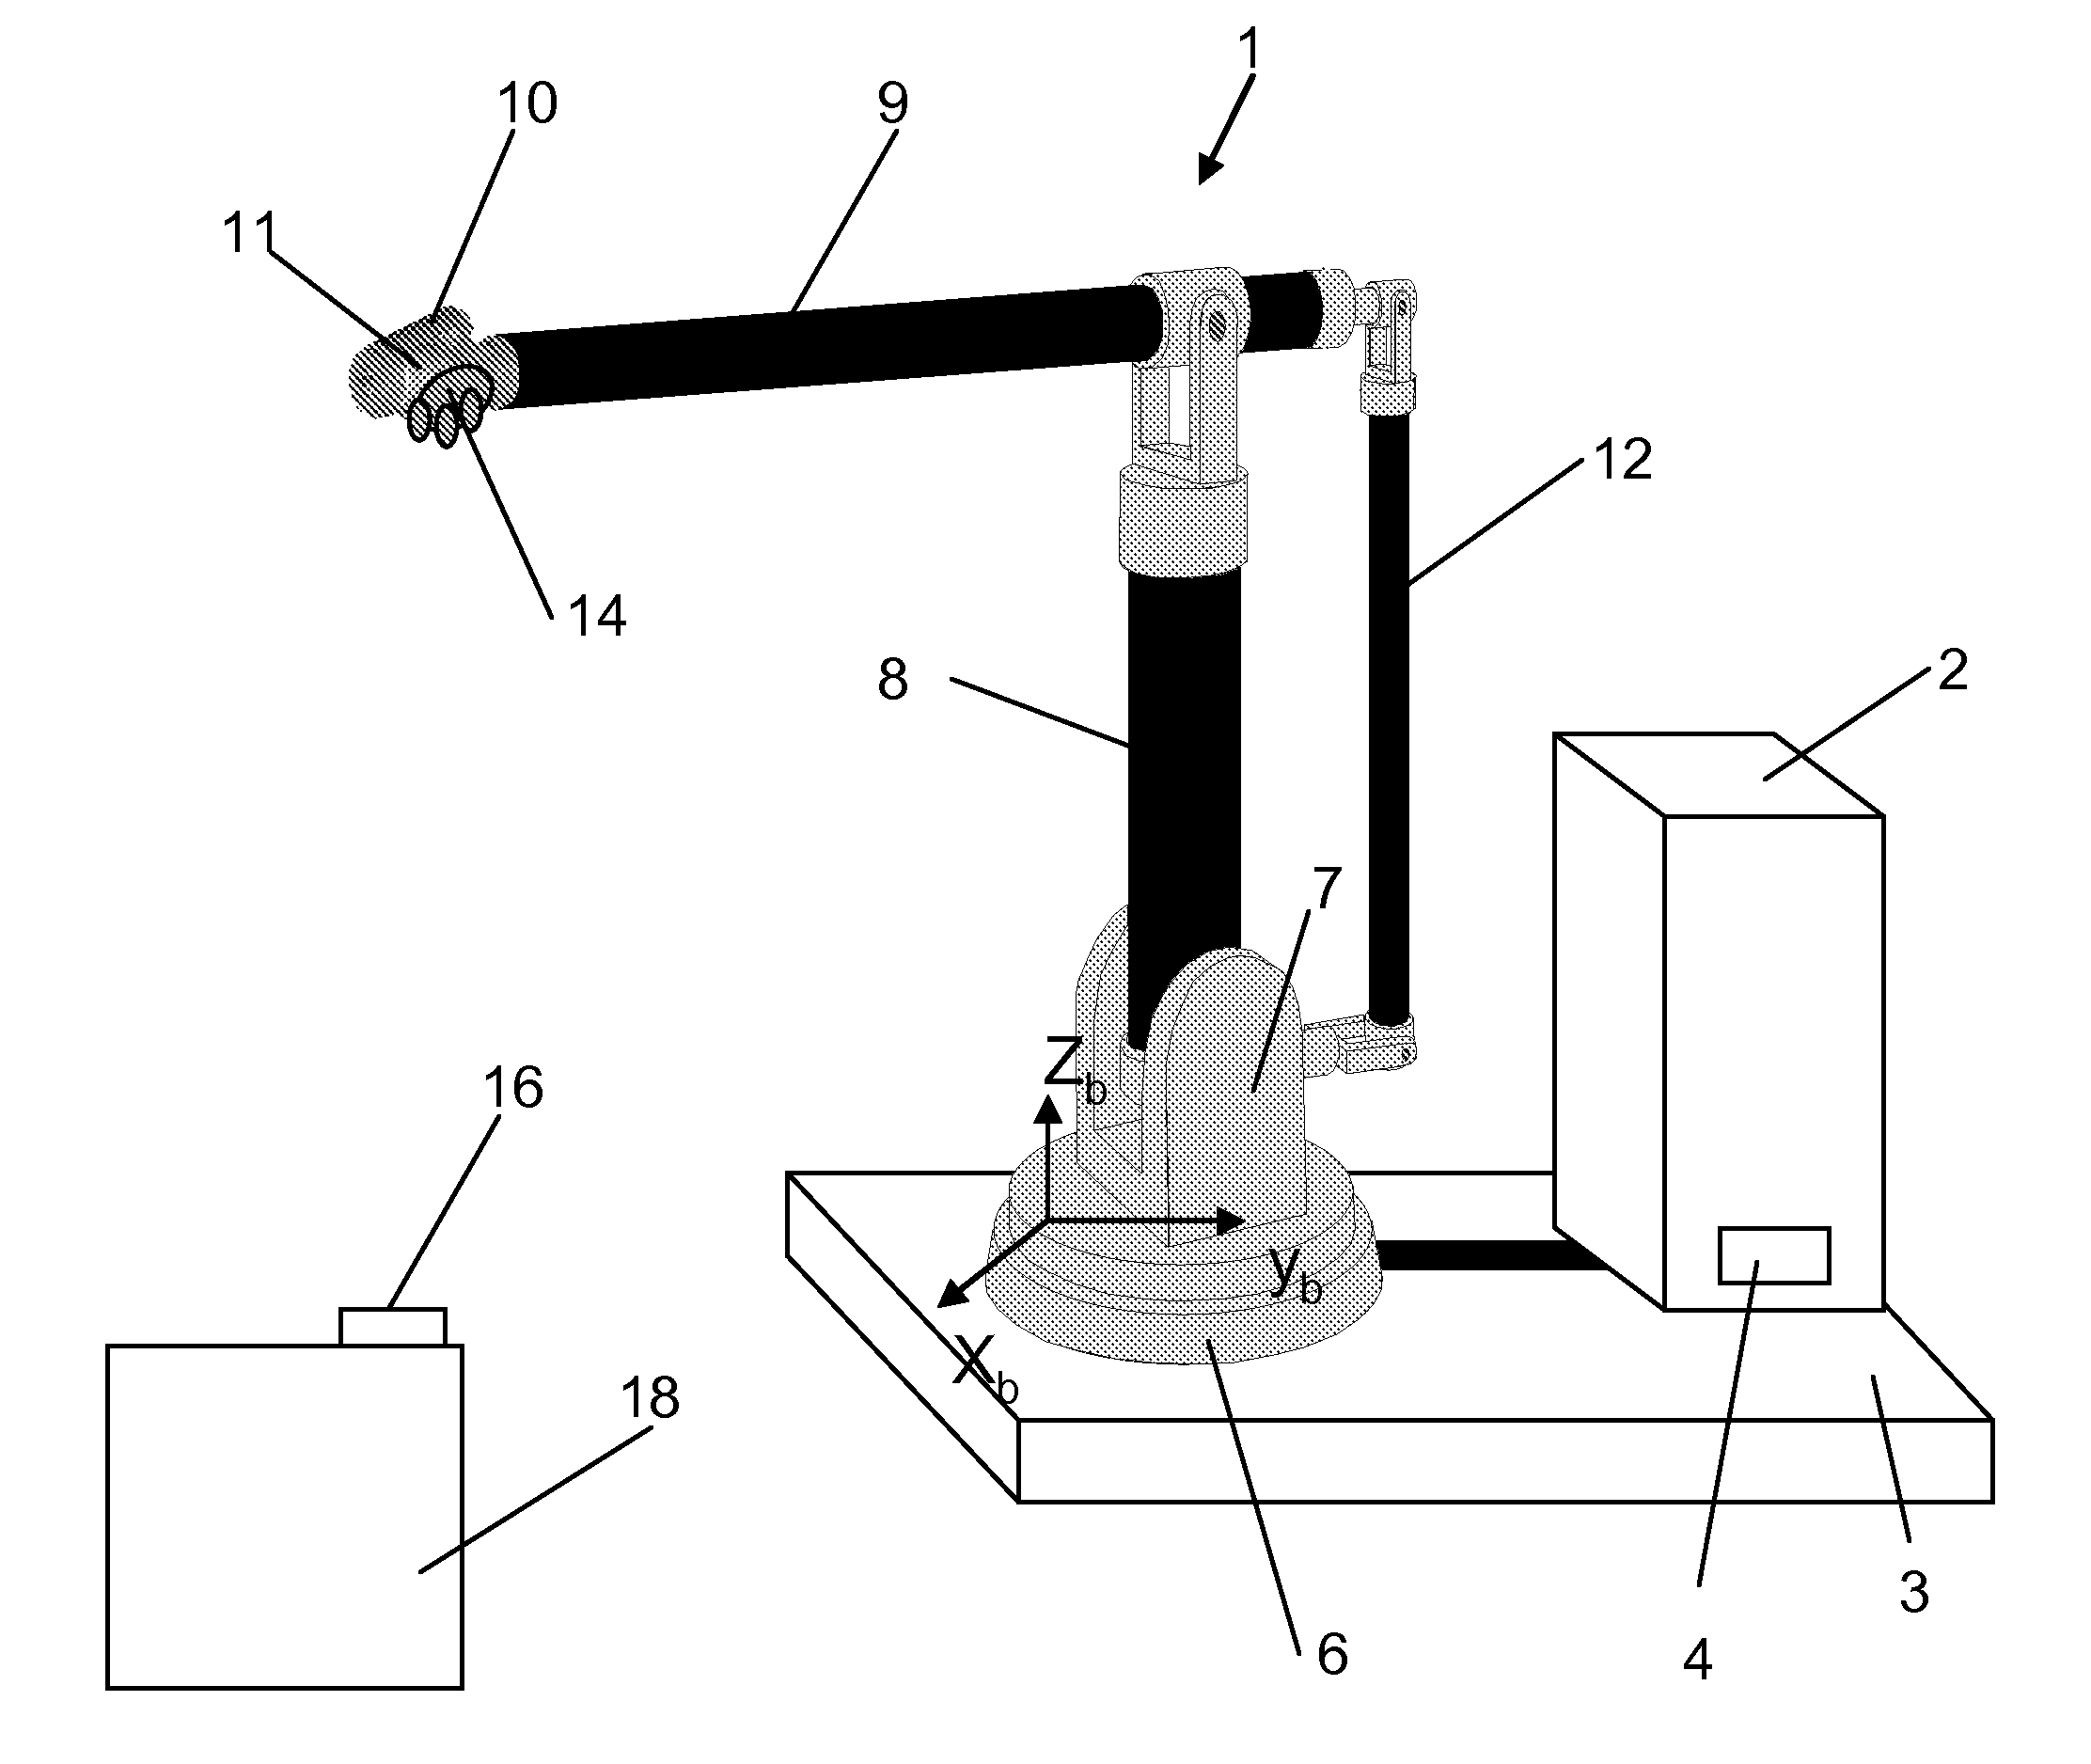 Calibration of a base coordinate system for an industrial robot